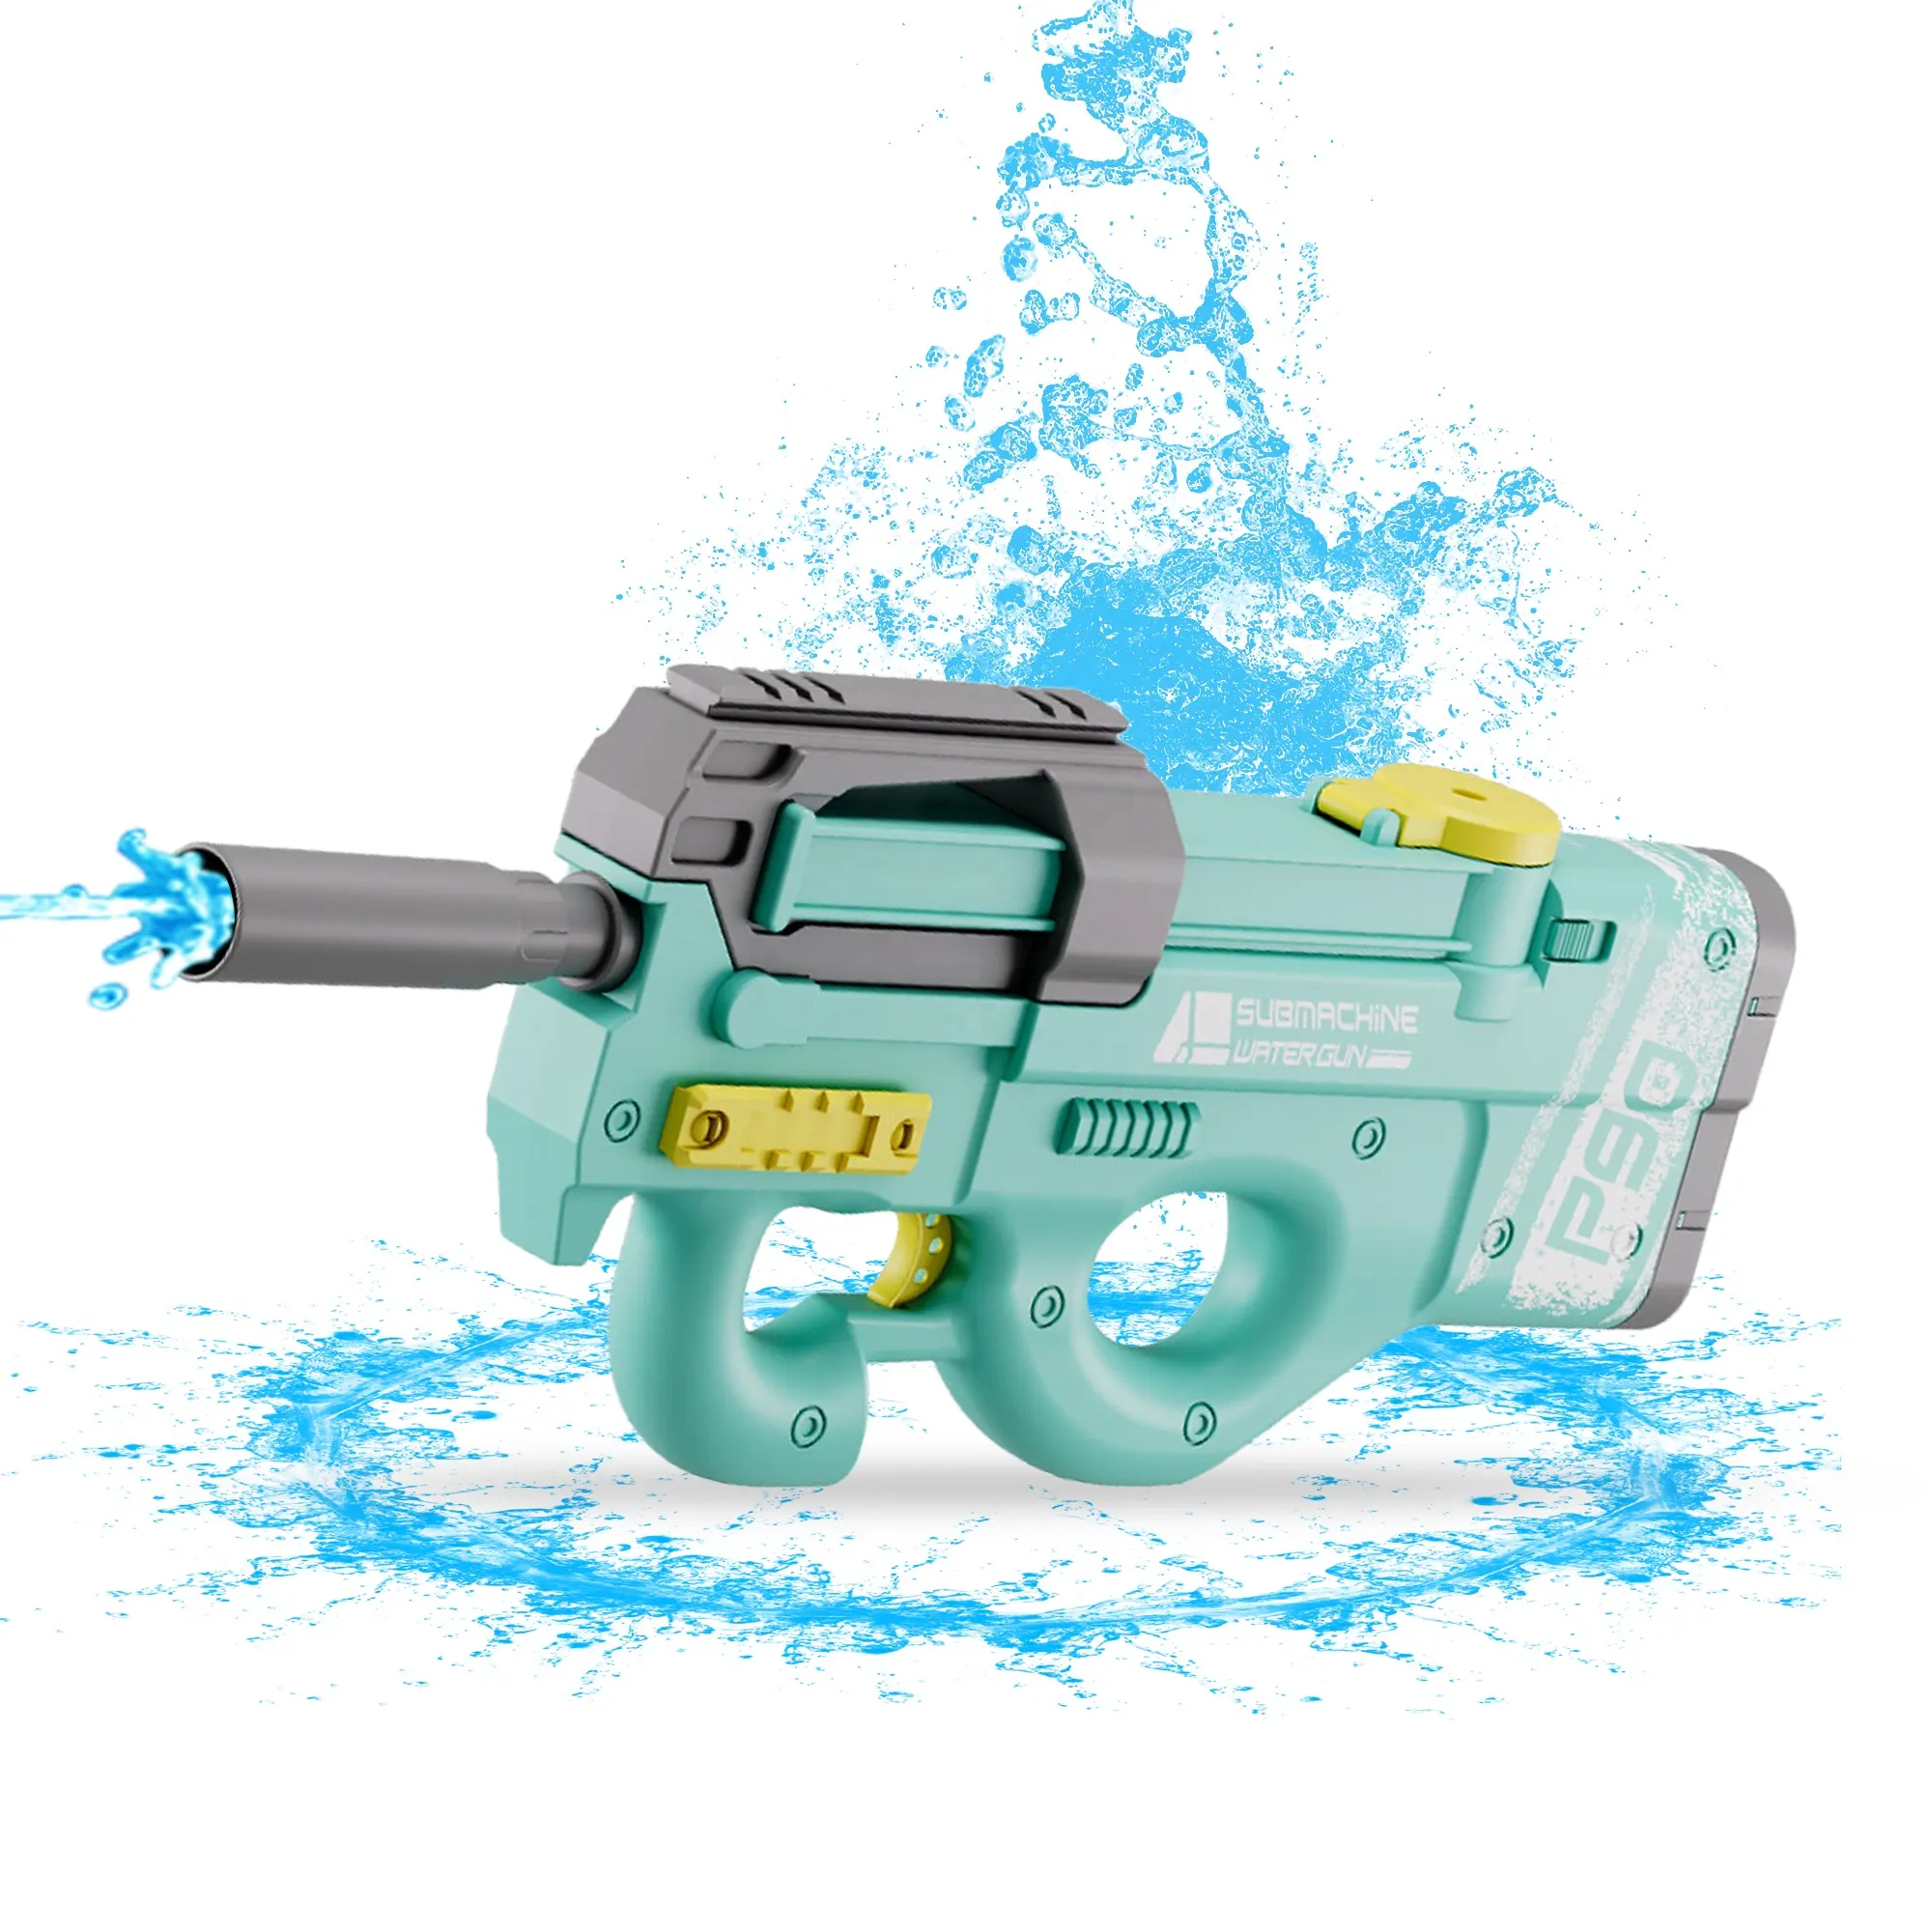 P90 submachine gun large capacity electric water gun high pressure continuous shooting children beach water game toys for Kids